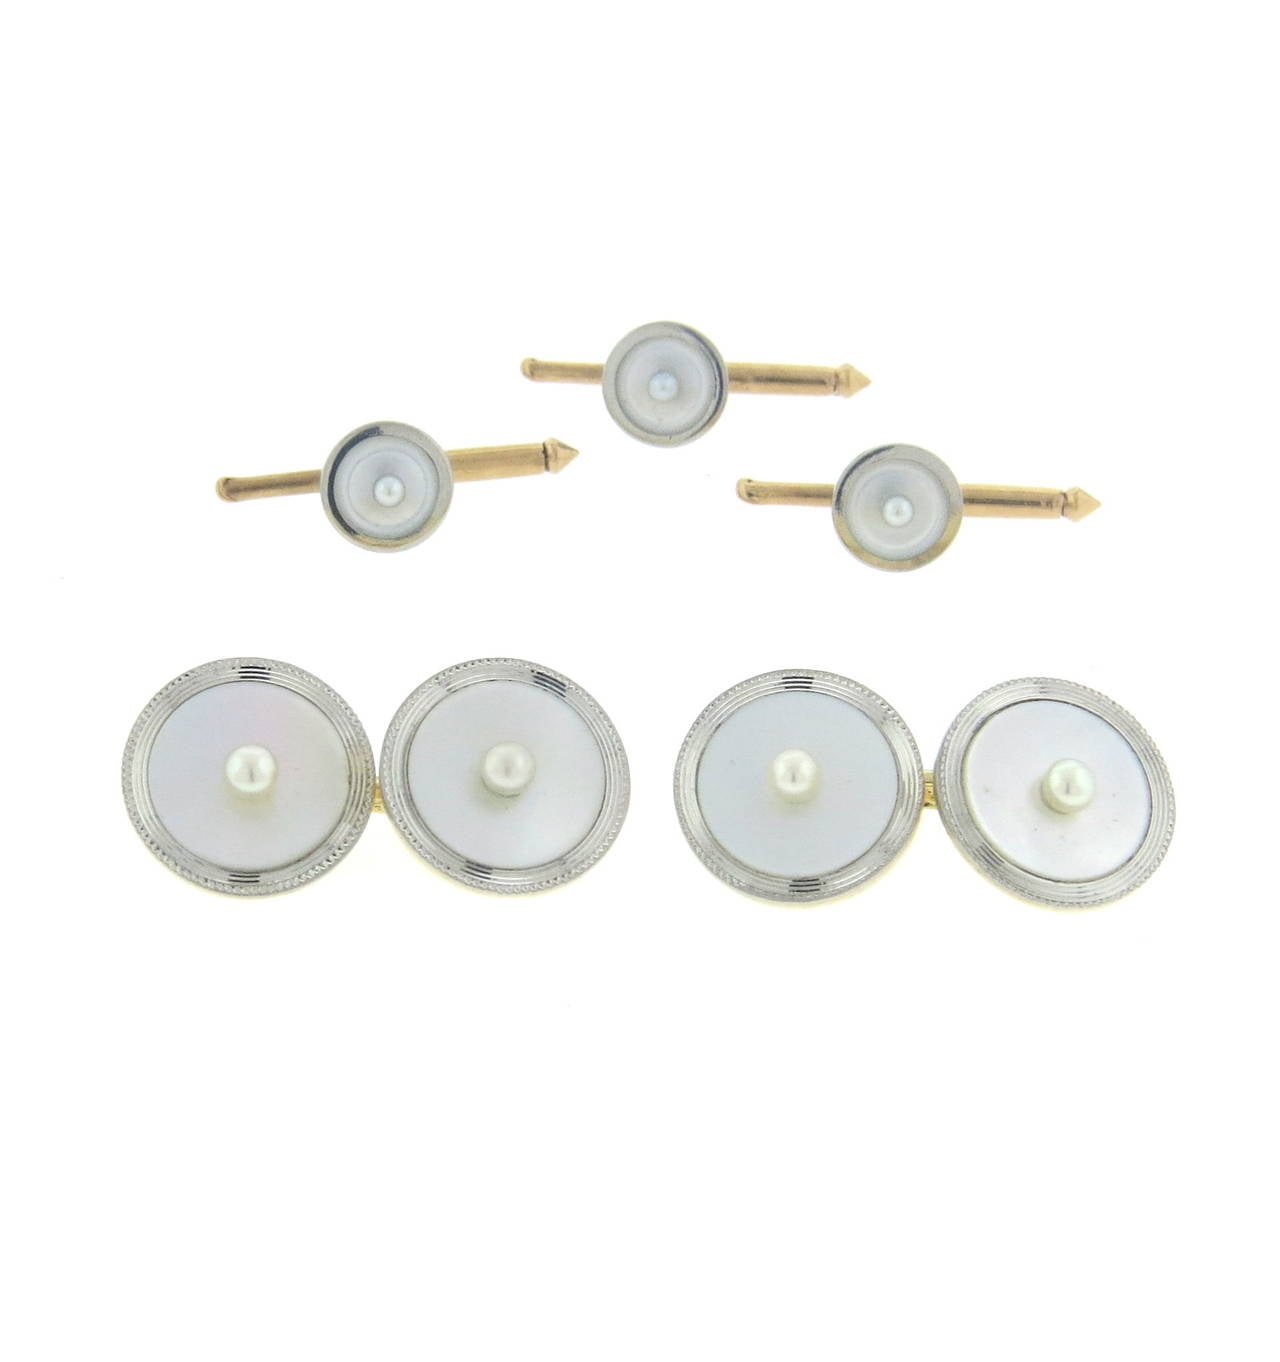 A 14k yellow gold and platinum cufflinks and studs set set with mother of pearl and seed pearls.  Crafted by Cartier, the cufflinks measure 14mm in diameter and the studs measure 8mm in diameter.  The weight of the set is 12.9 grams.  Marked: